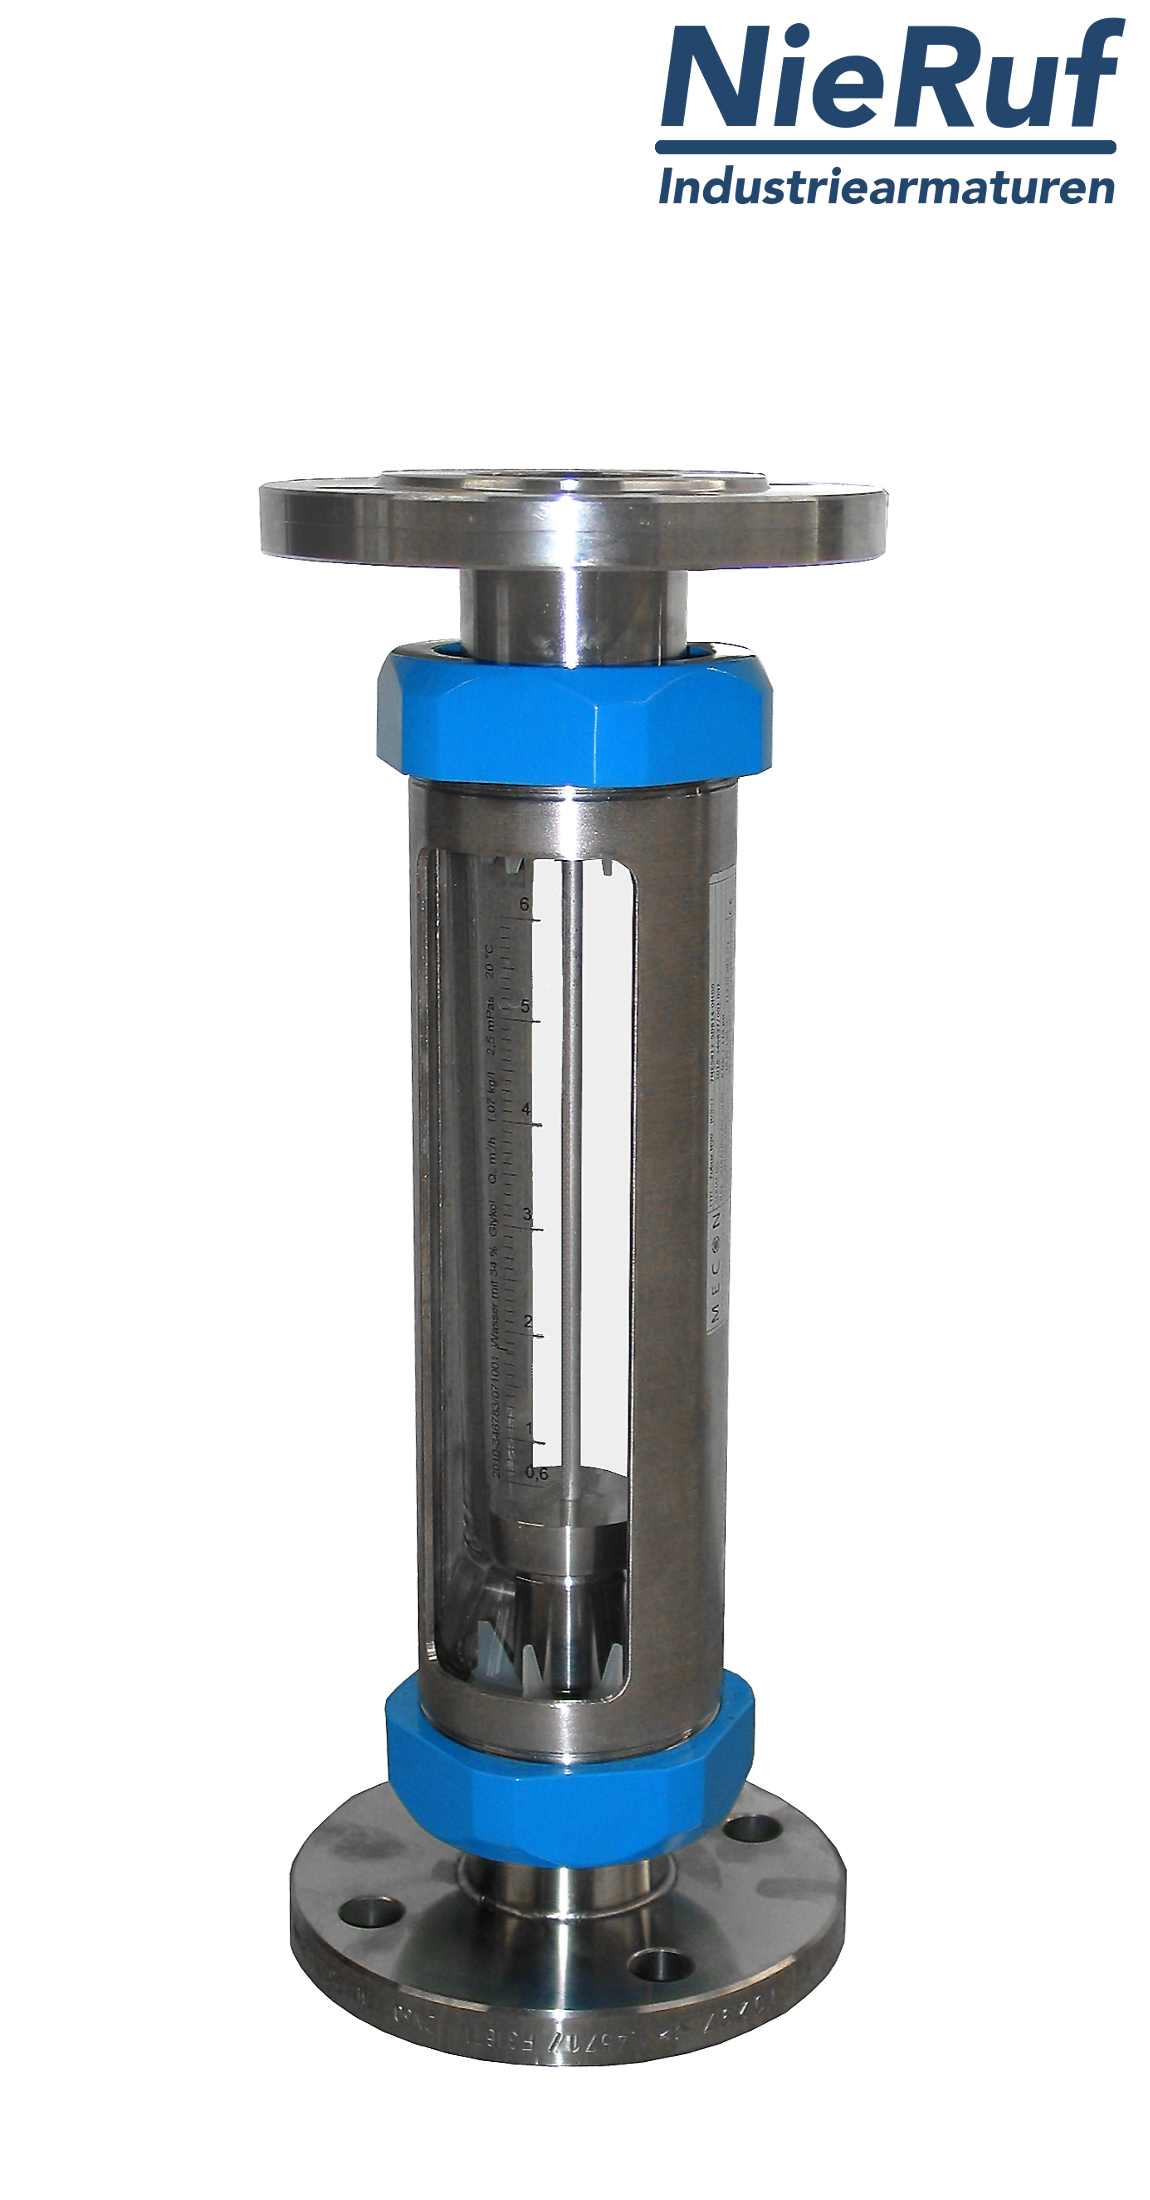 Variable area flowmeter stainless steel + borosilicate flange DN25 250.0 - 2500 l/h water FKM